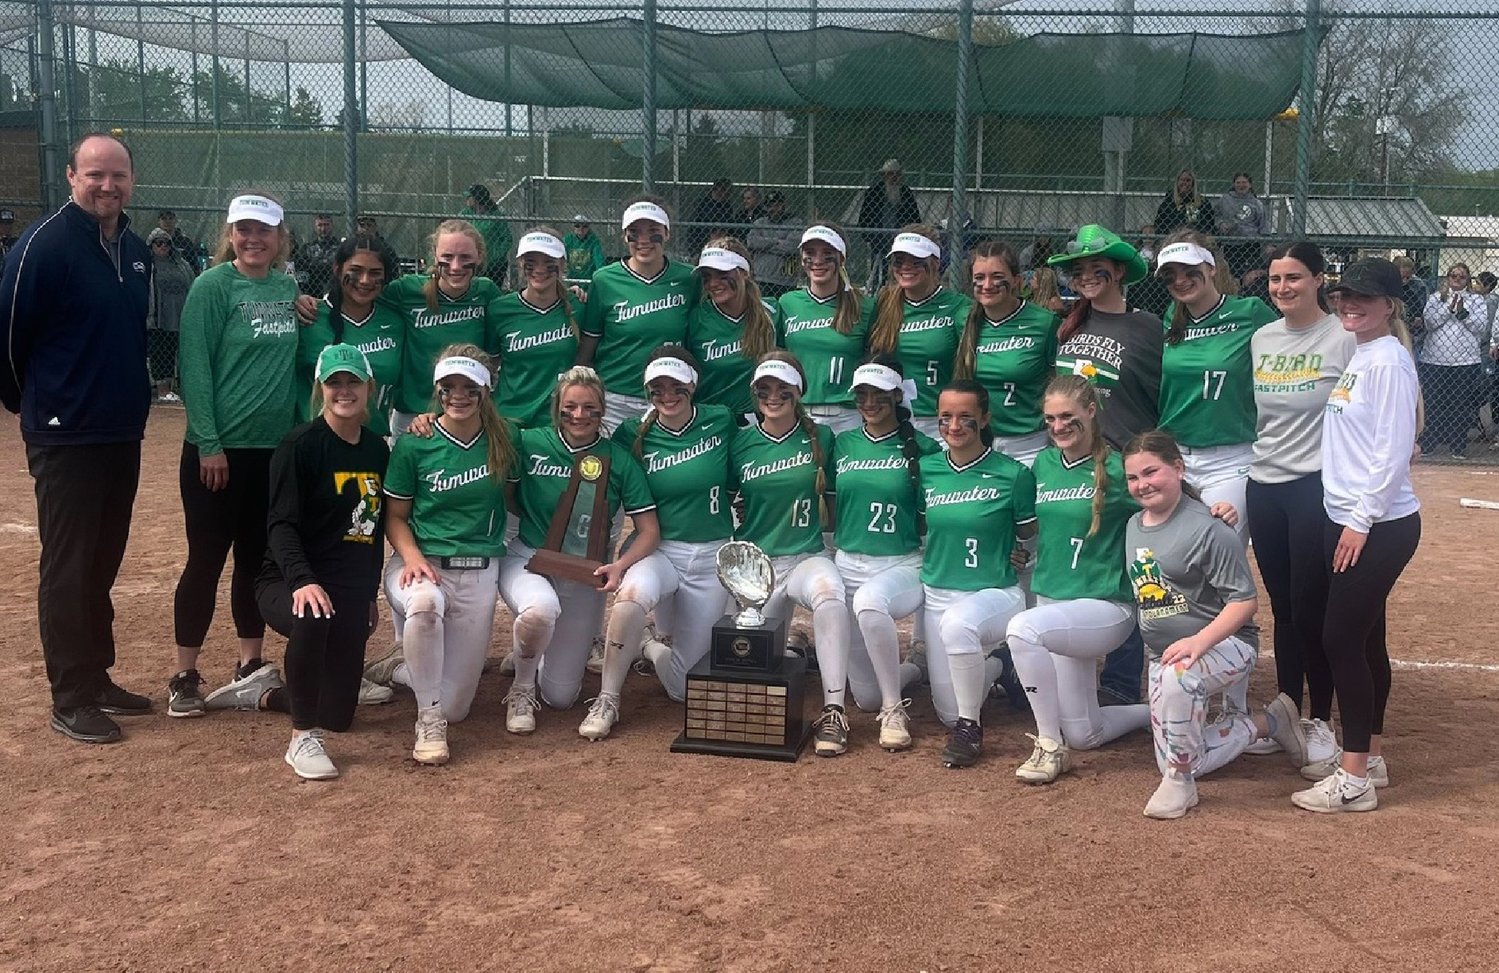 Tumwater's (22-2, 15-1) season ends with the 2A EvCo crown, plus second-place honors in the District 4 tournament. Saturday's state title marked the third in school history.